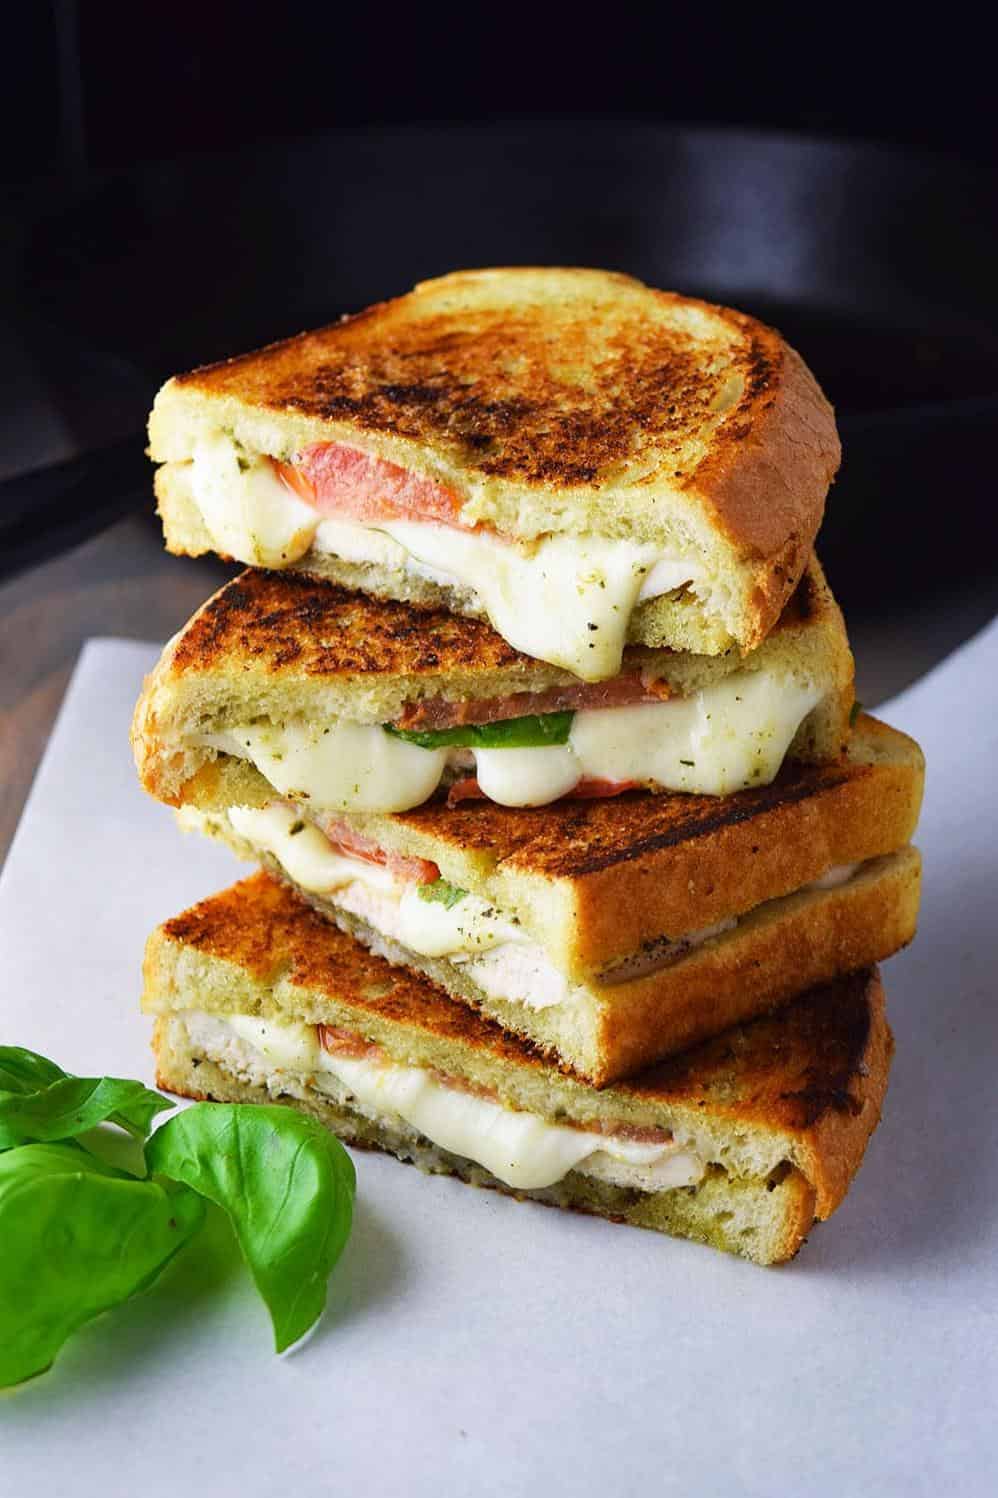  This Pressed Chicken-Pesto Melt will give you all the melty, oozing goodness you crave in a sandwich.